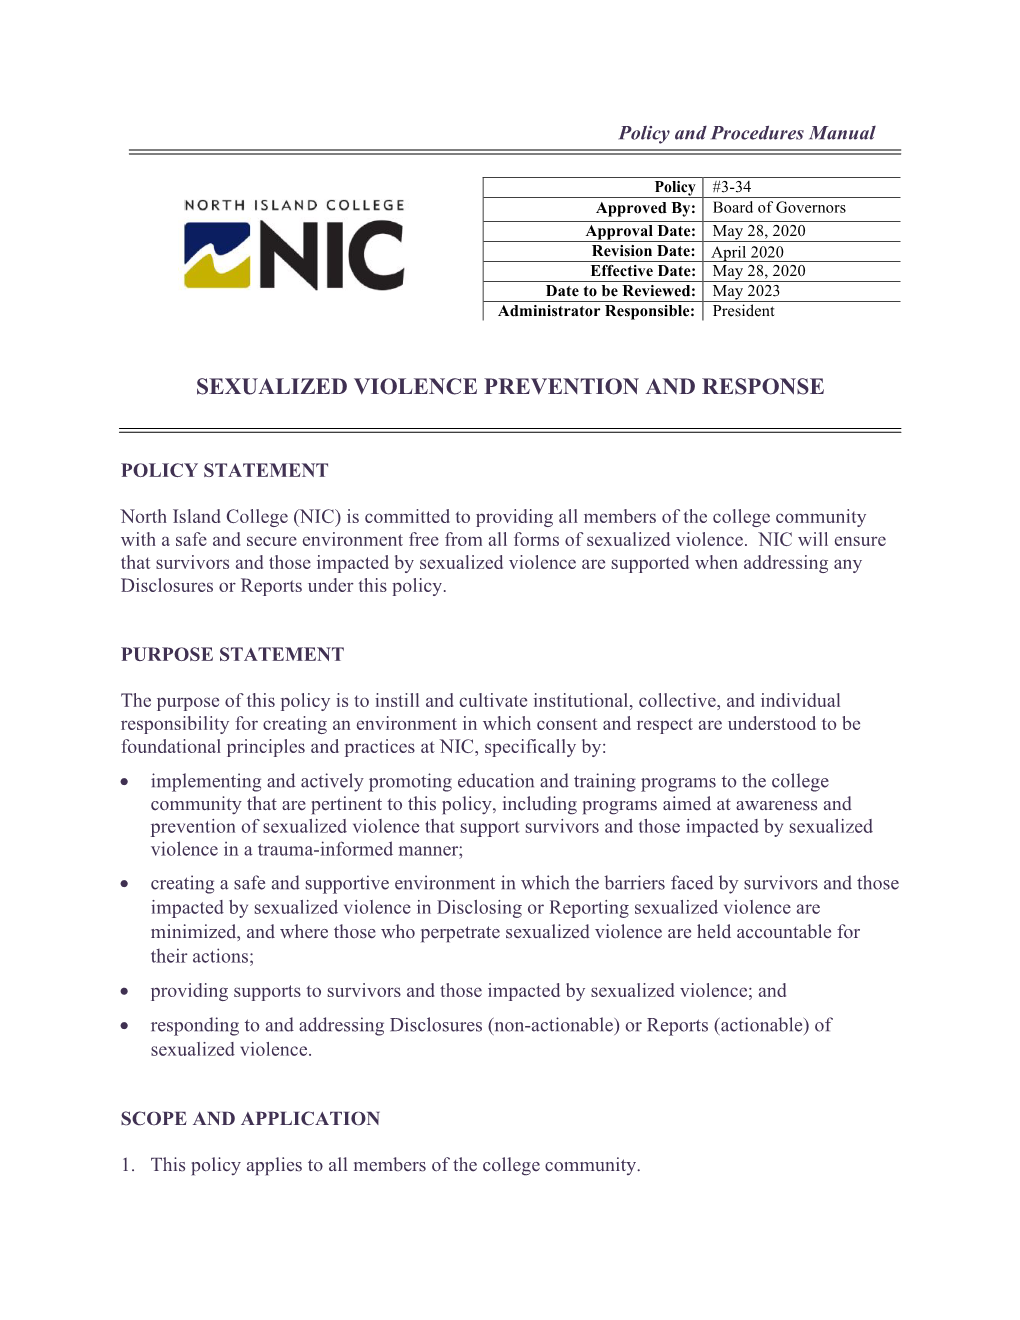 NIC Policy #3-34 Sexual Violence and Misconduct